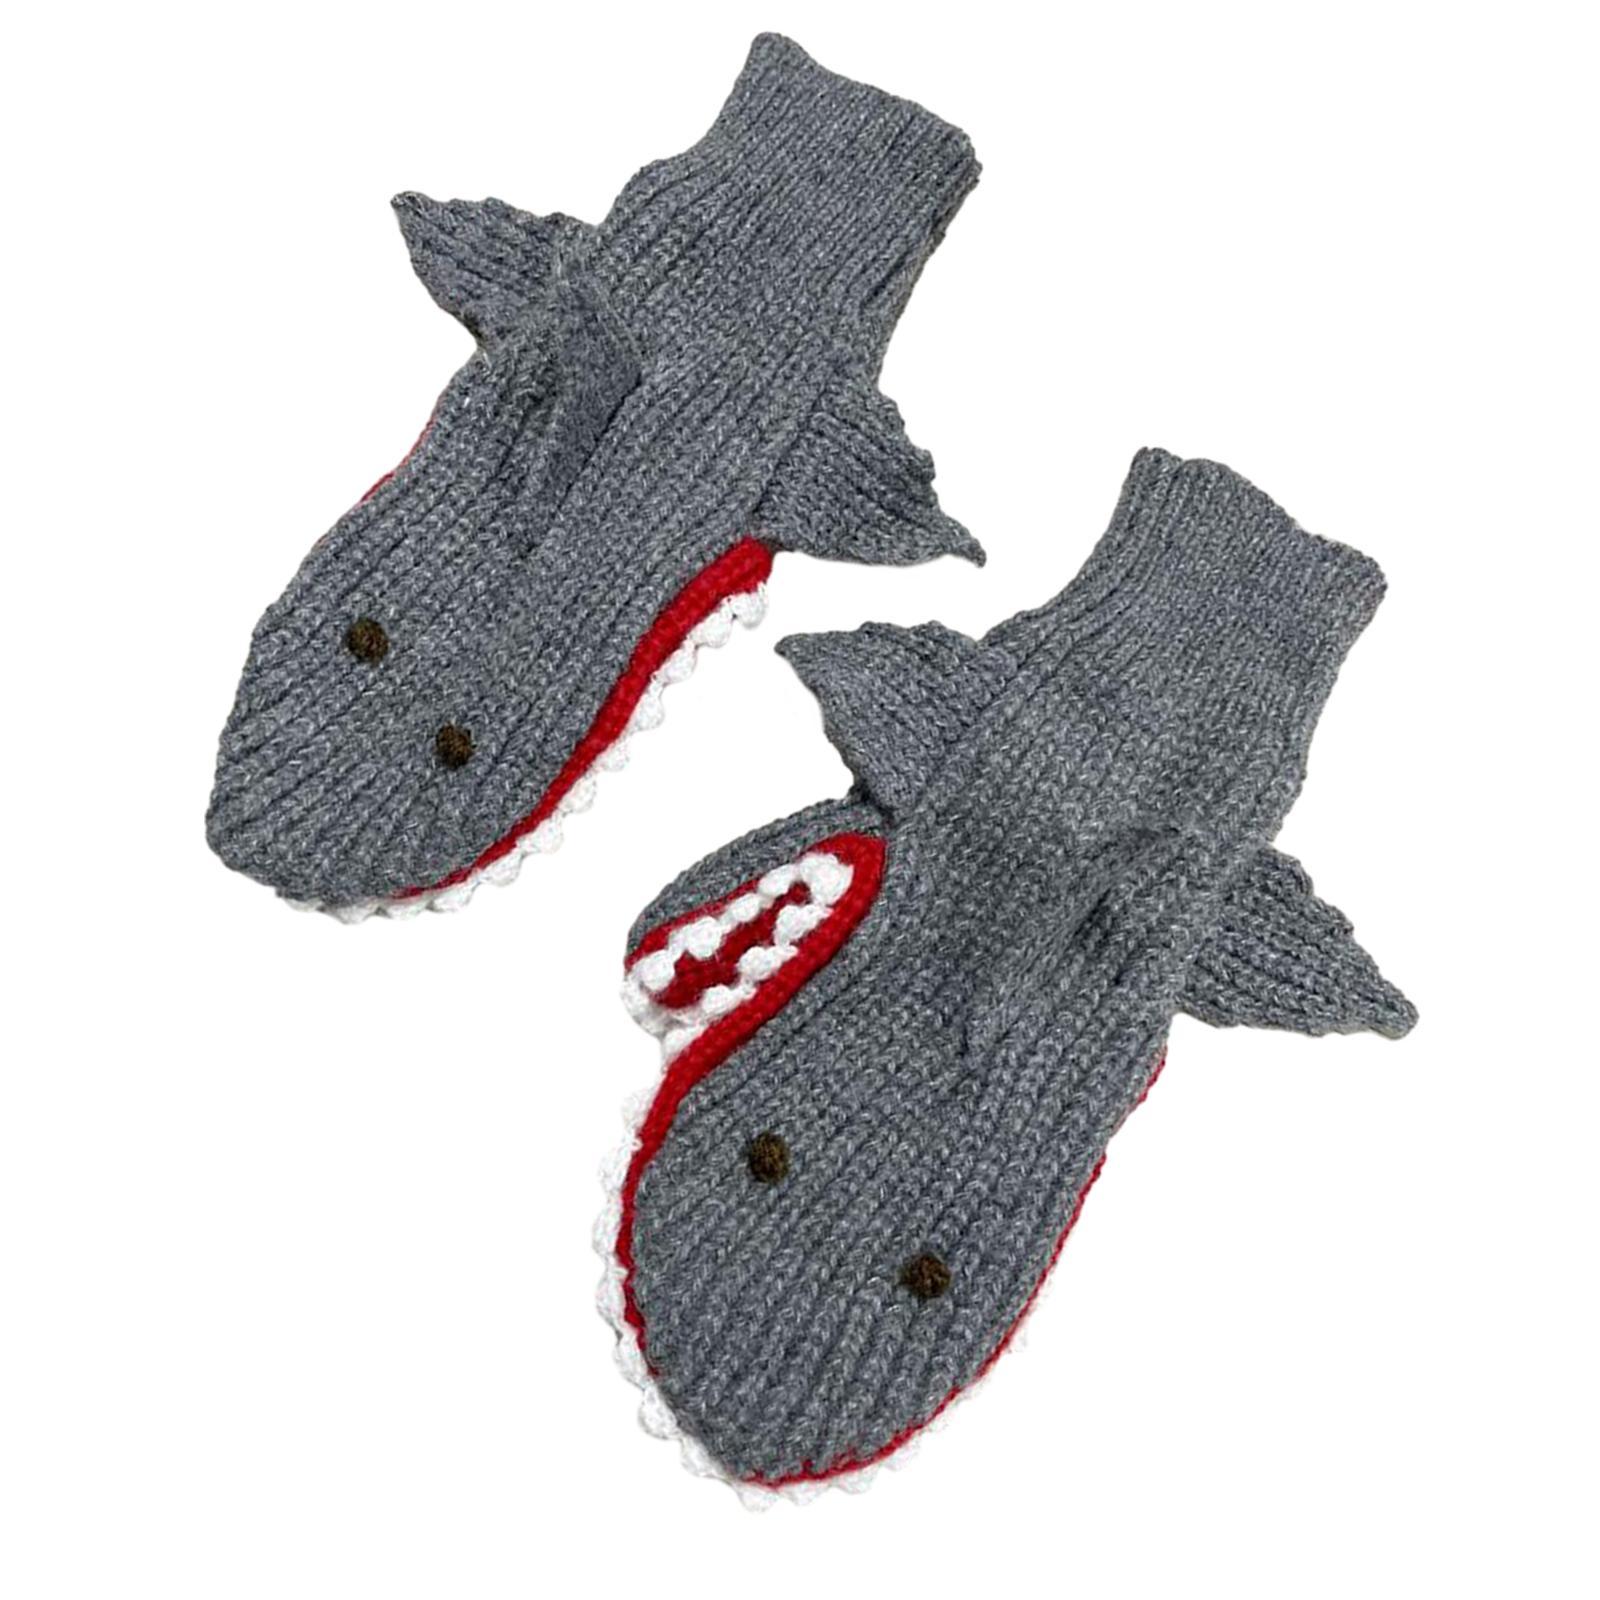 Soft Thick Boys Girls Knitted Glove for Christmas Skiing Hiking